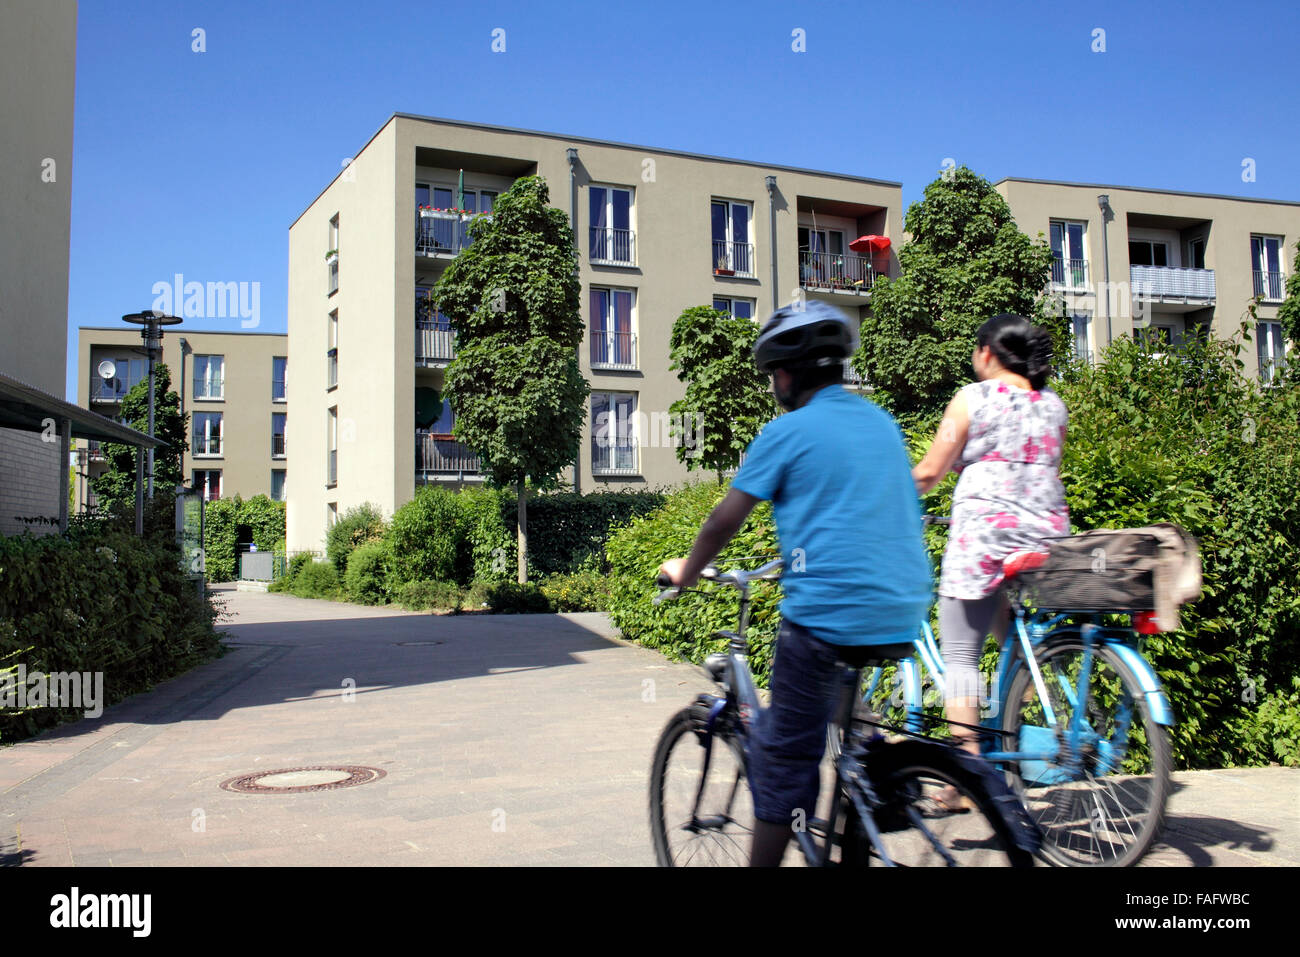 A pedestrian and bike route within the car-free settlement of Gartensiedlung Weissenburg, Muenster, Germany. Stock Photo